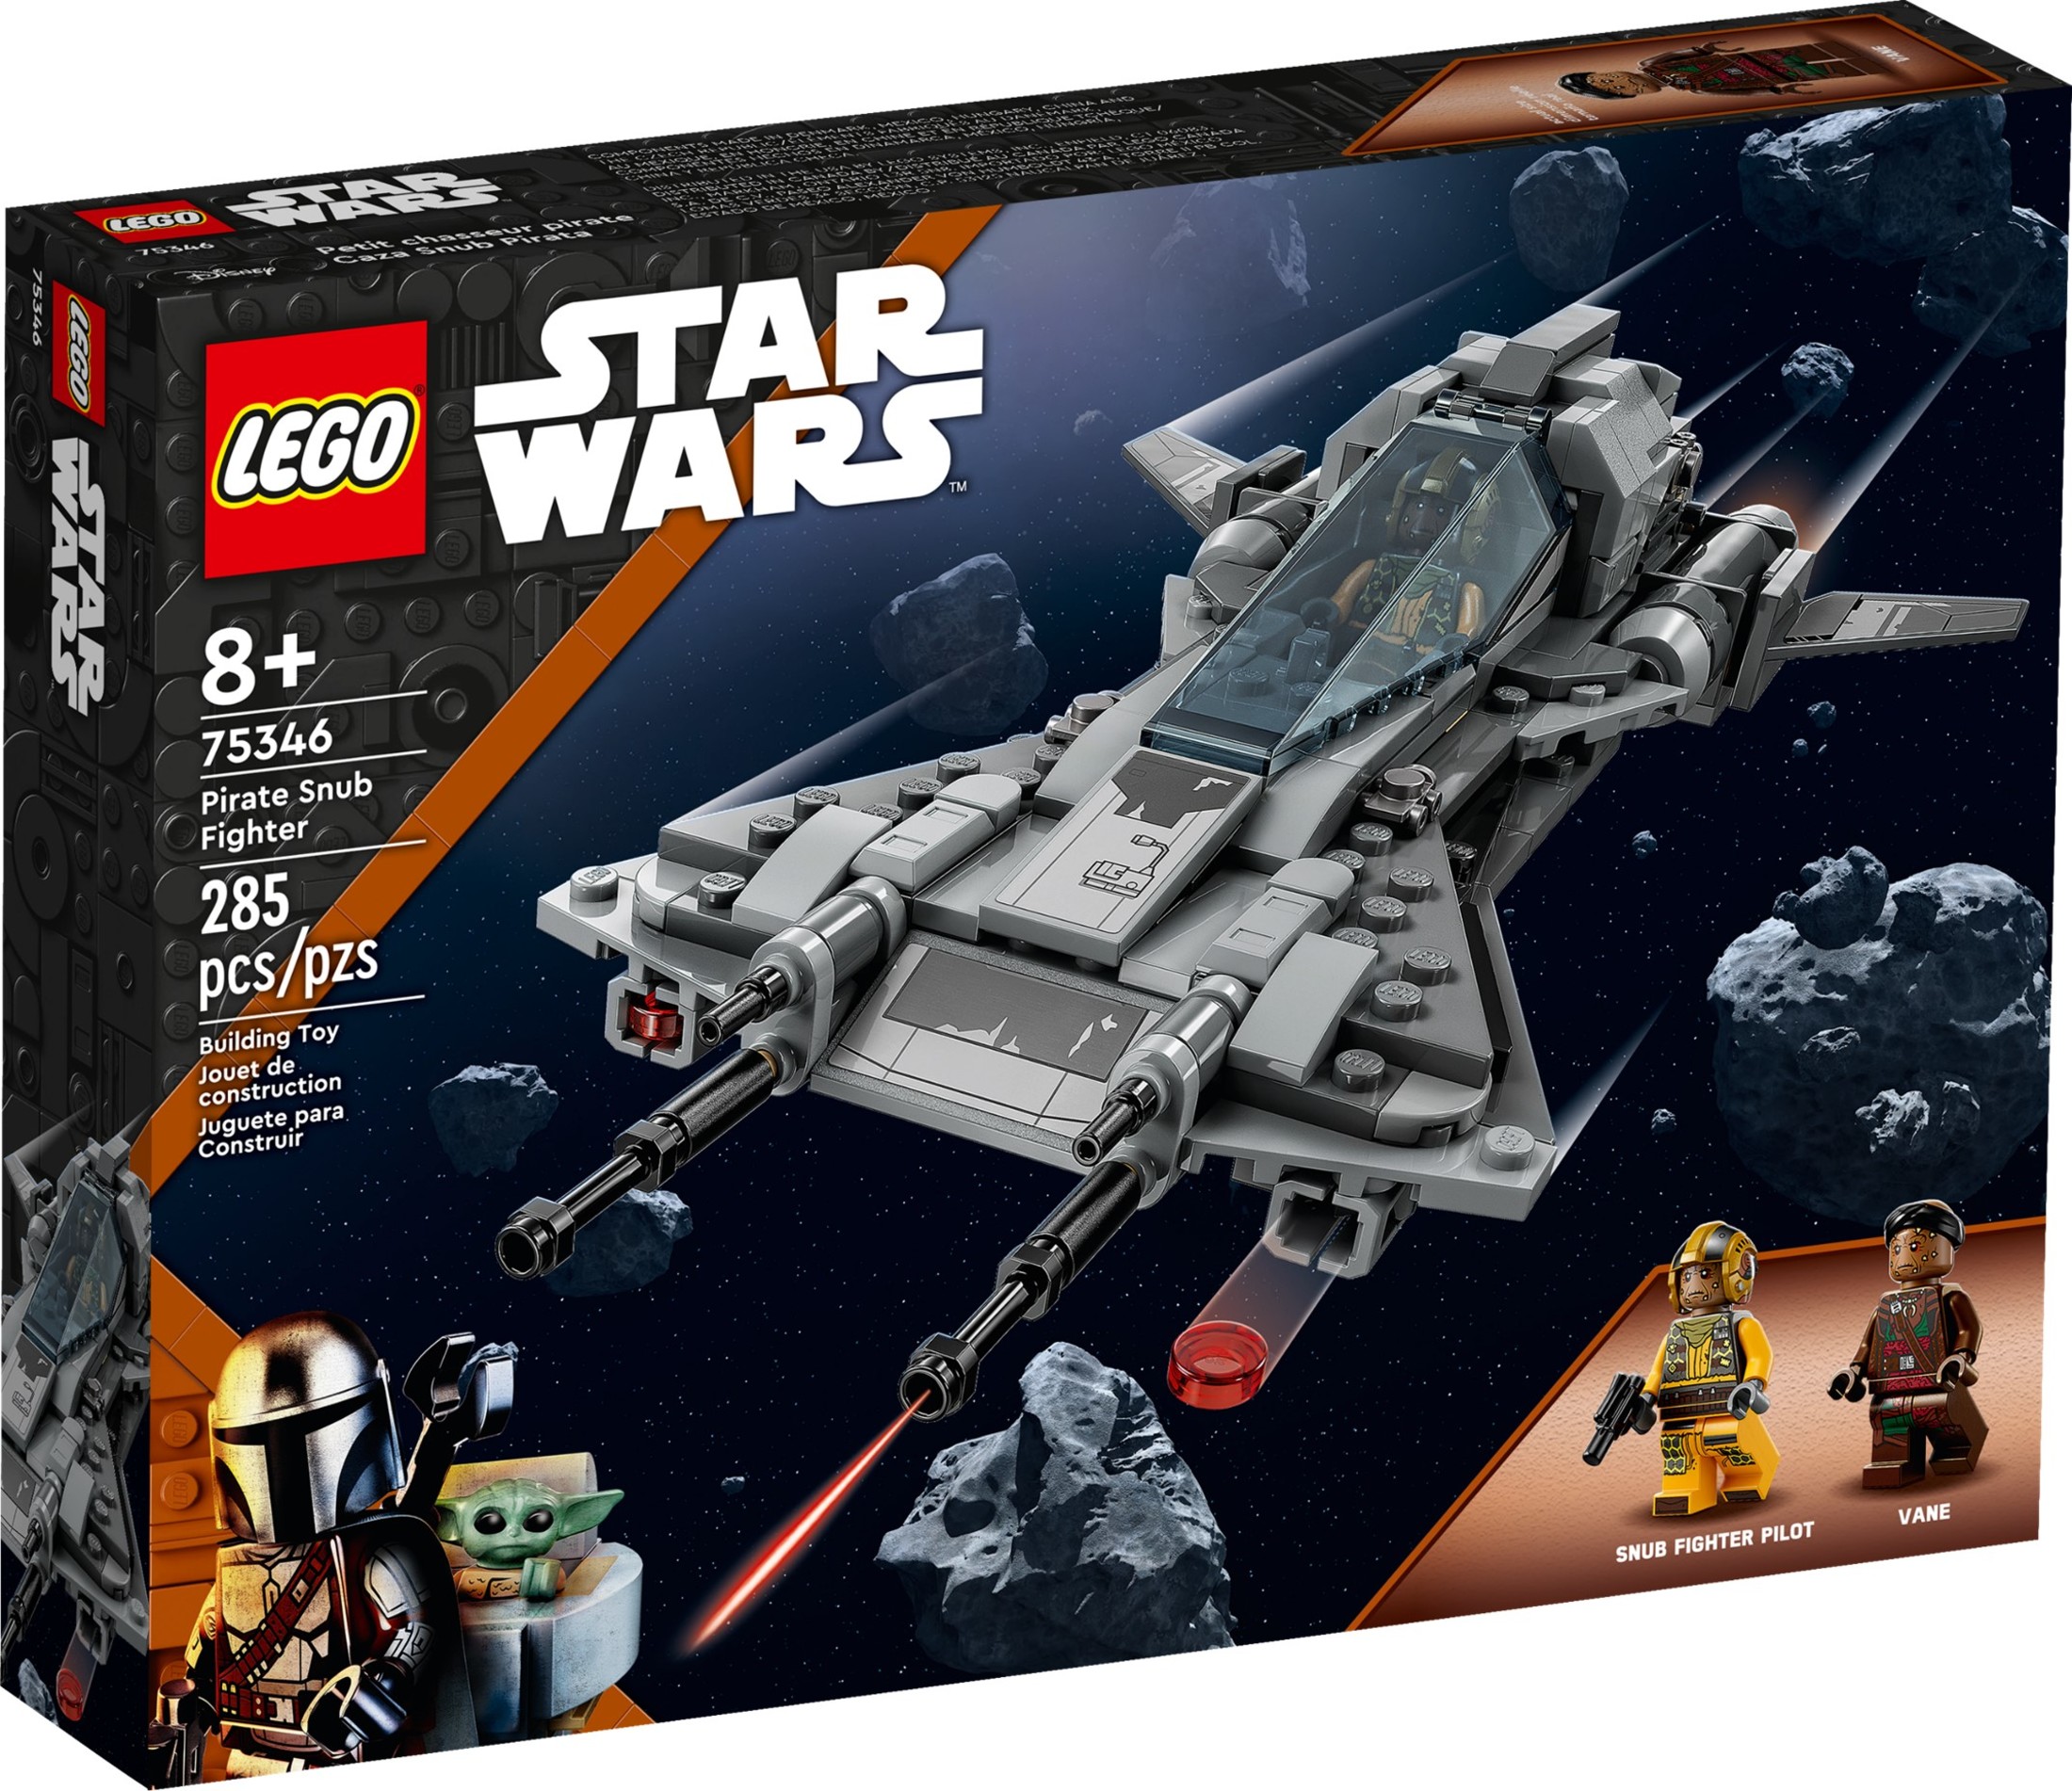 LEGO Star Wars Pirate Snub Fighter 75346 Buildable Starfighter Playset Featuring Pirate Pilot and Vane Characters from the Mandalorian Season 3, Birthday Gift Idea for Boys and Girls Ages 8 and up - image 4 of 10